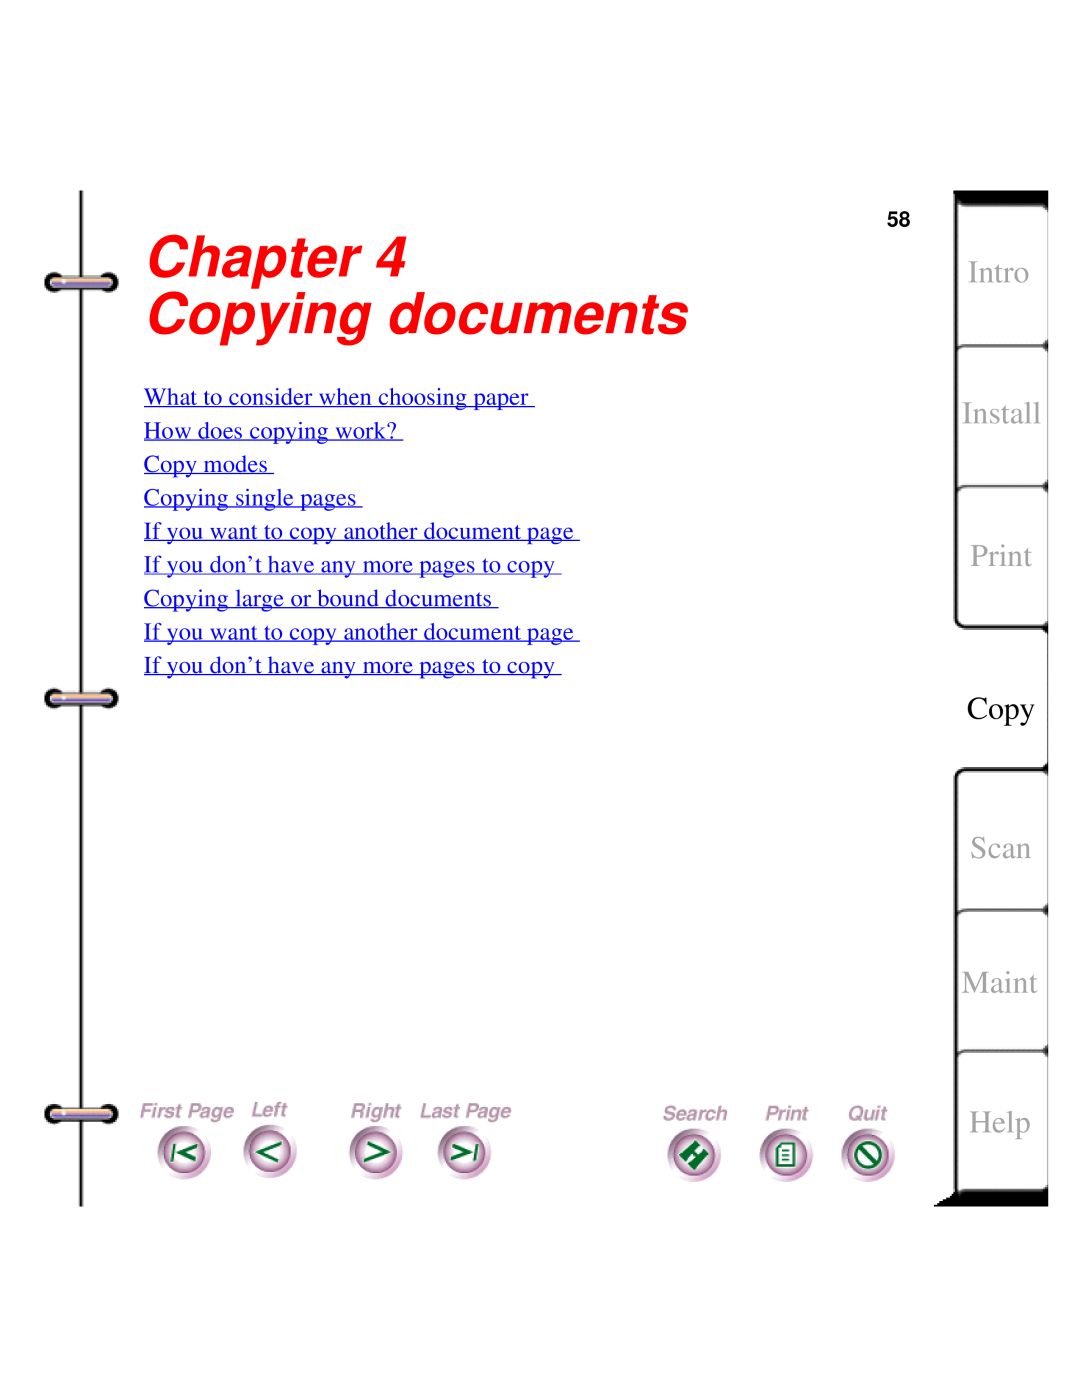 Xerox Document HomeCentre manual Chapter Copying documents, Intro Install Print, Scan Maint, Help 